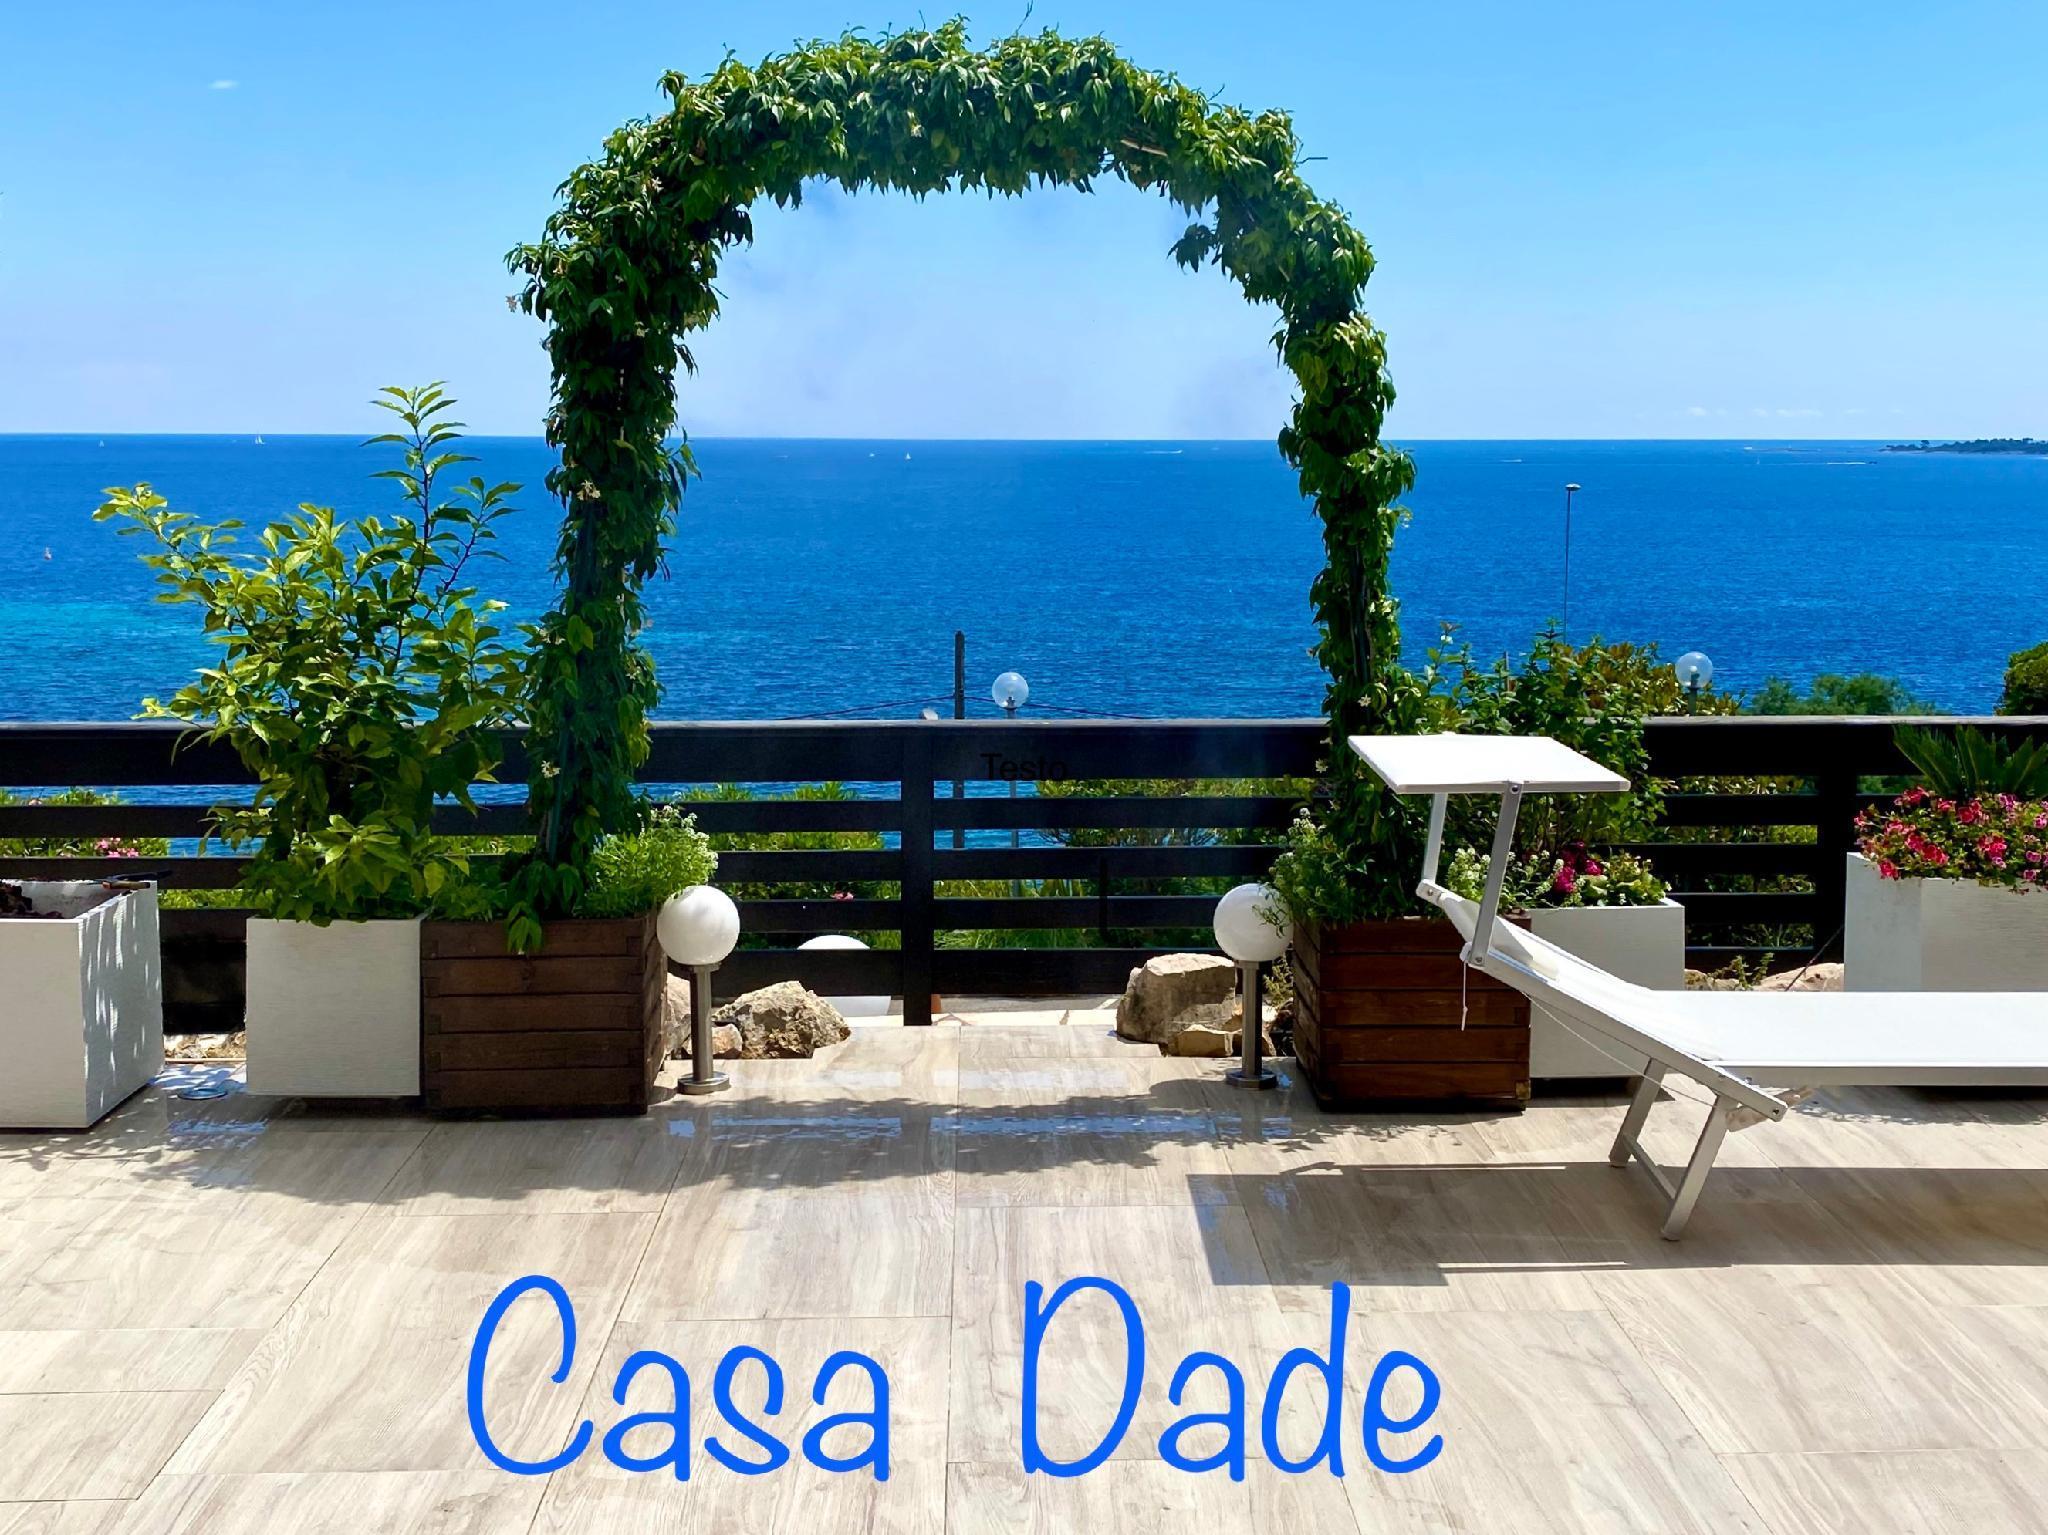 Casa Dade Cannes - Cannes